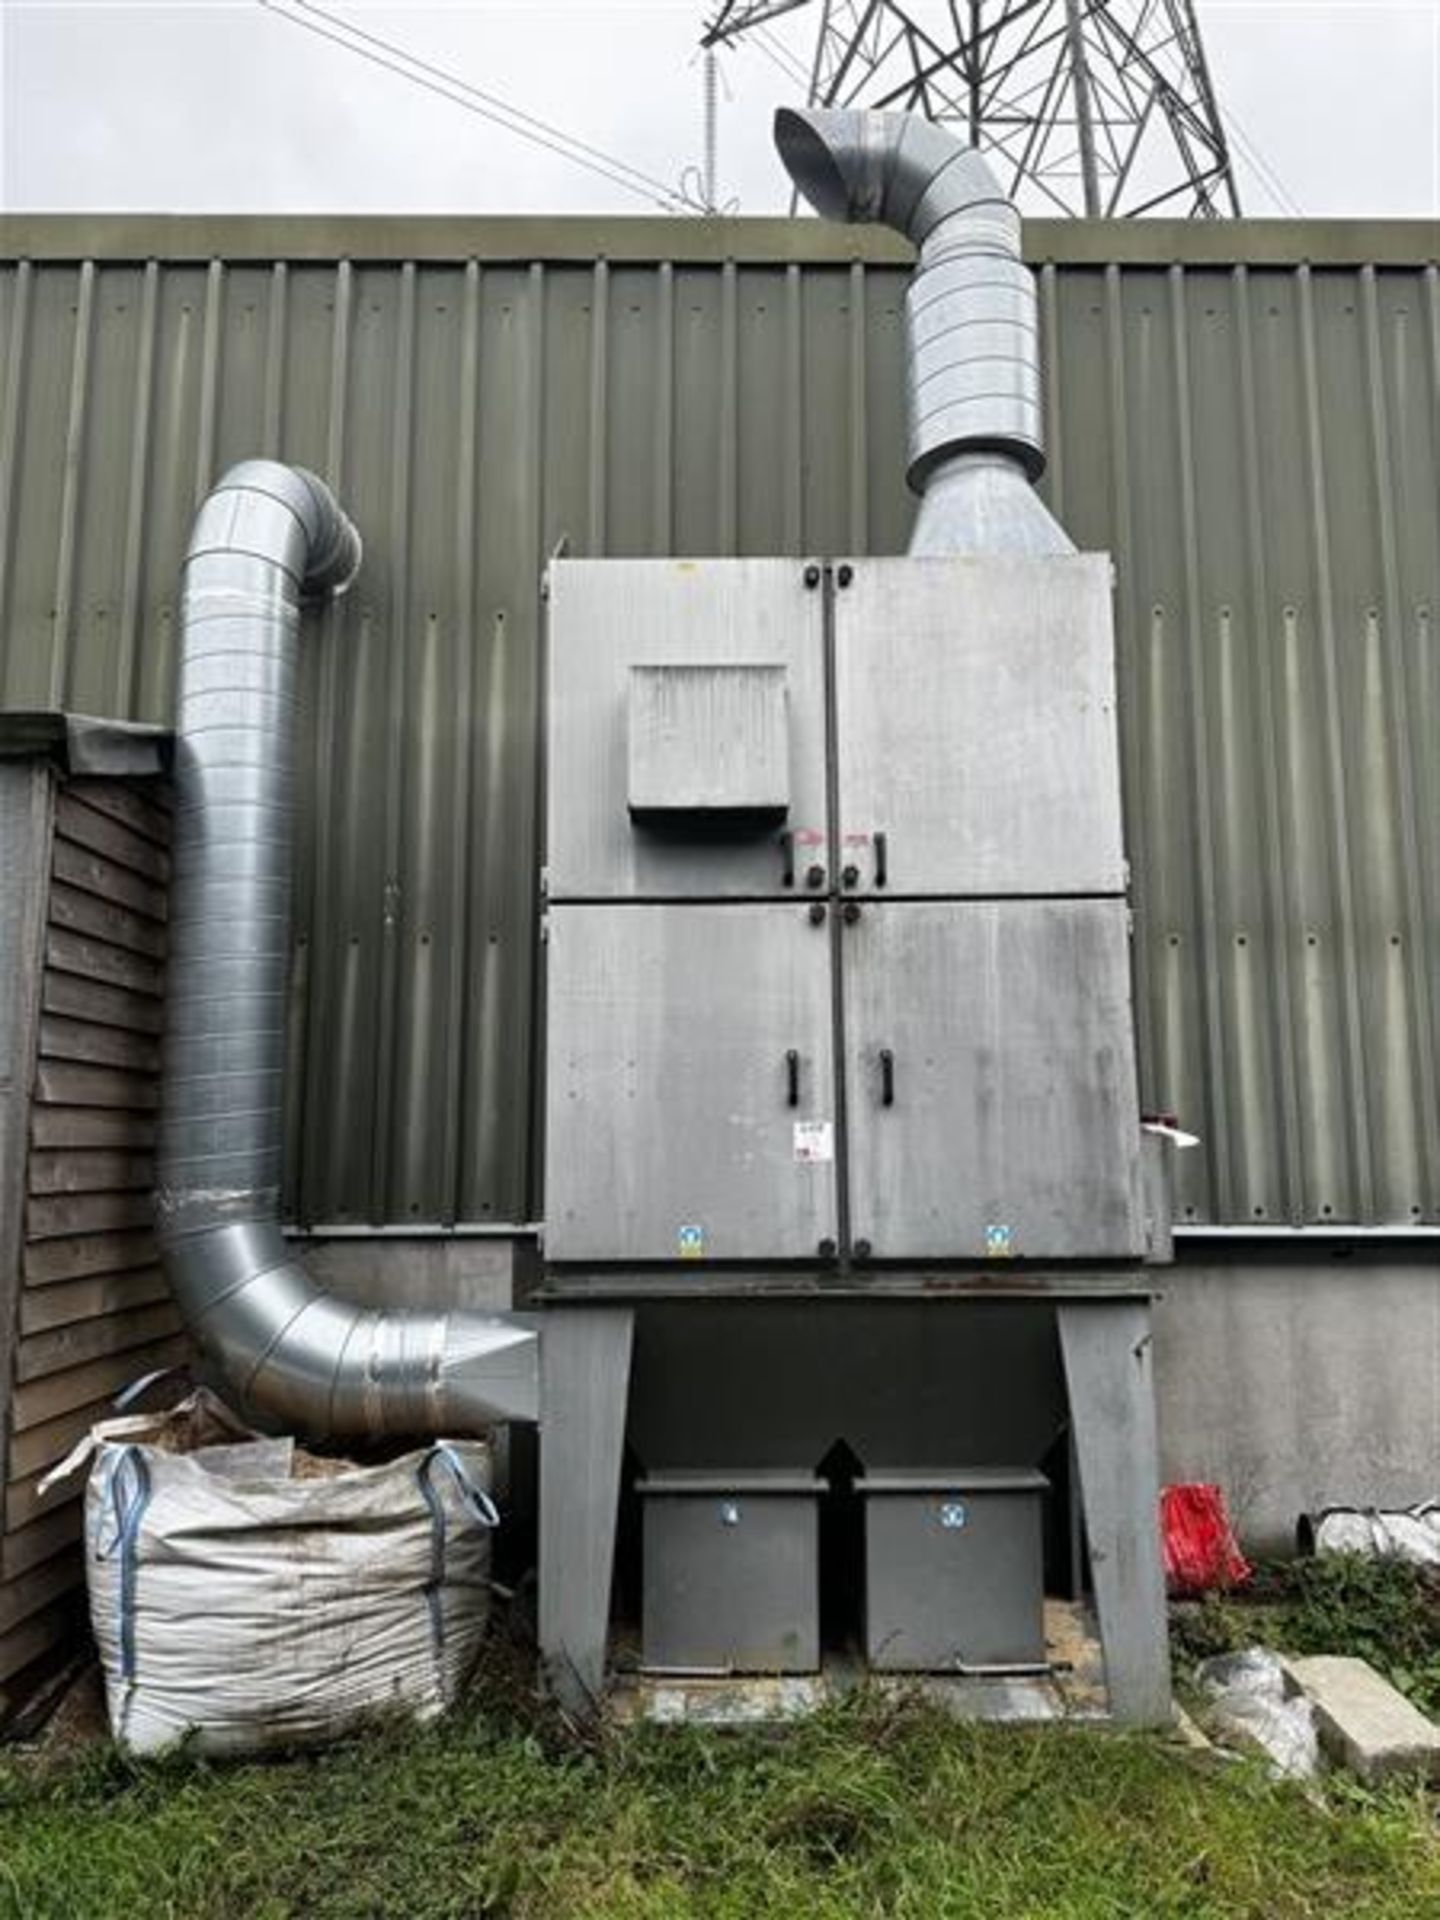 A1 Extraction Ltd dust extractor height 3.2m x length 1.7m x width 105cm (approx) Excluding height